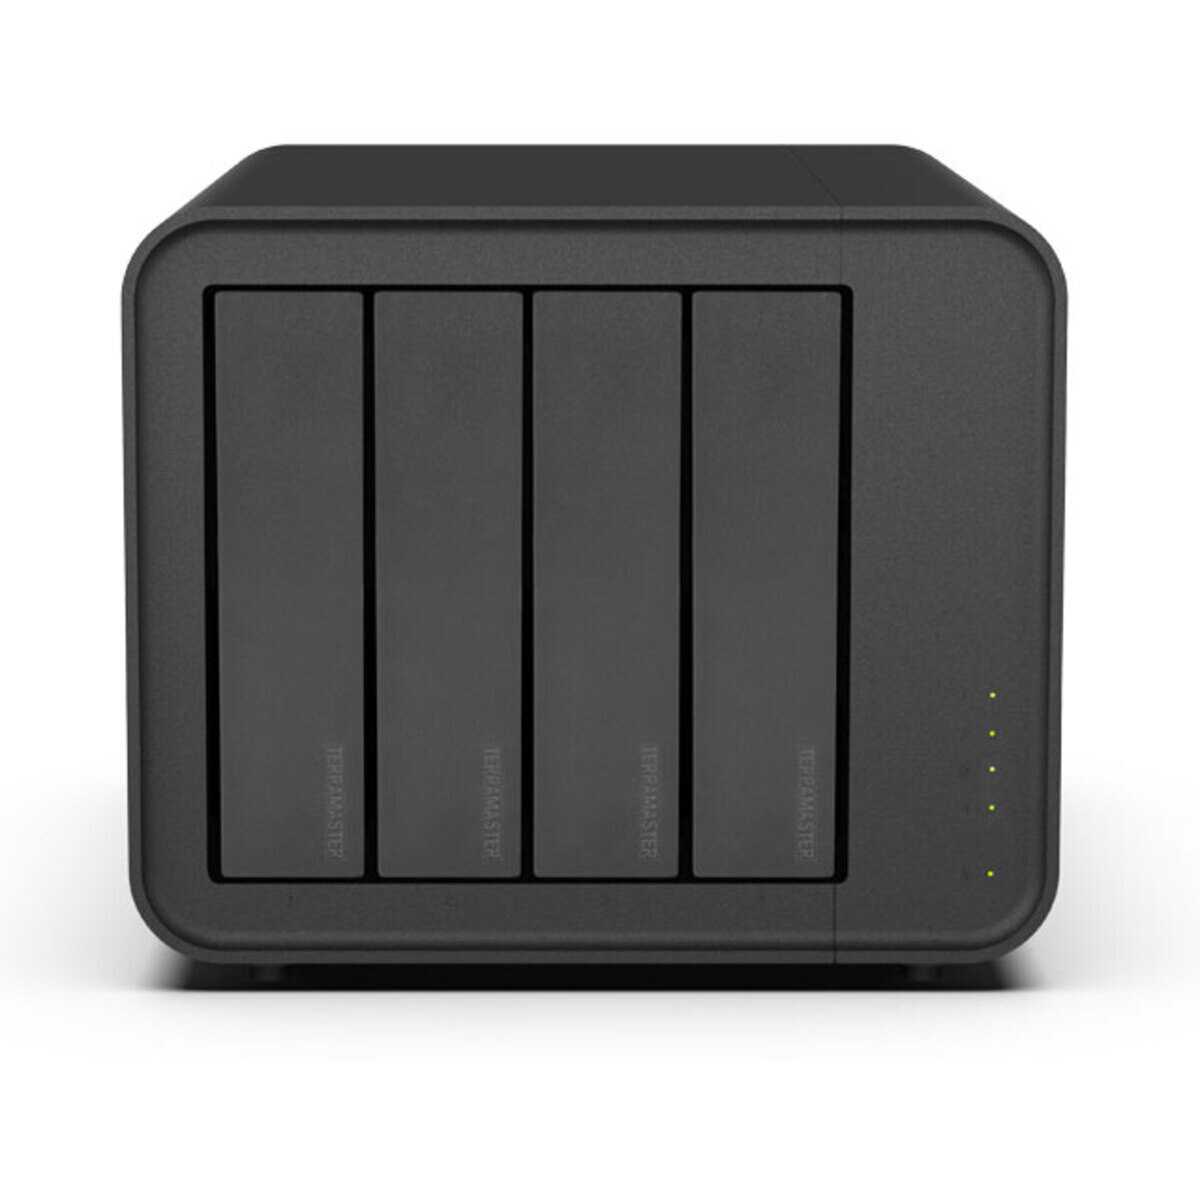 TerraMaster F4-212 8tb 4-Bay Desktop Personal / Basic Home / Small Office NAS - Network Attached Storage Device 4x2tb Sandisk Ultra 3D SDSSDH3-2T00 2.5 560/520MB/s SATA 6Gb/s SSD CONSUMER Class Drives Installed - Burn-In Tested F4-212